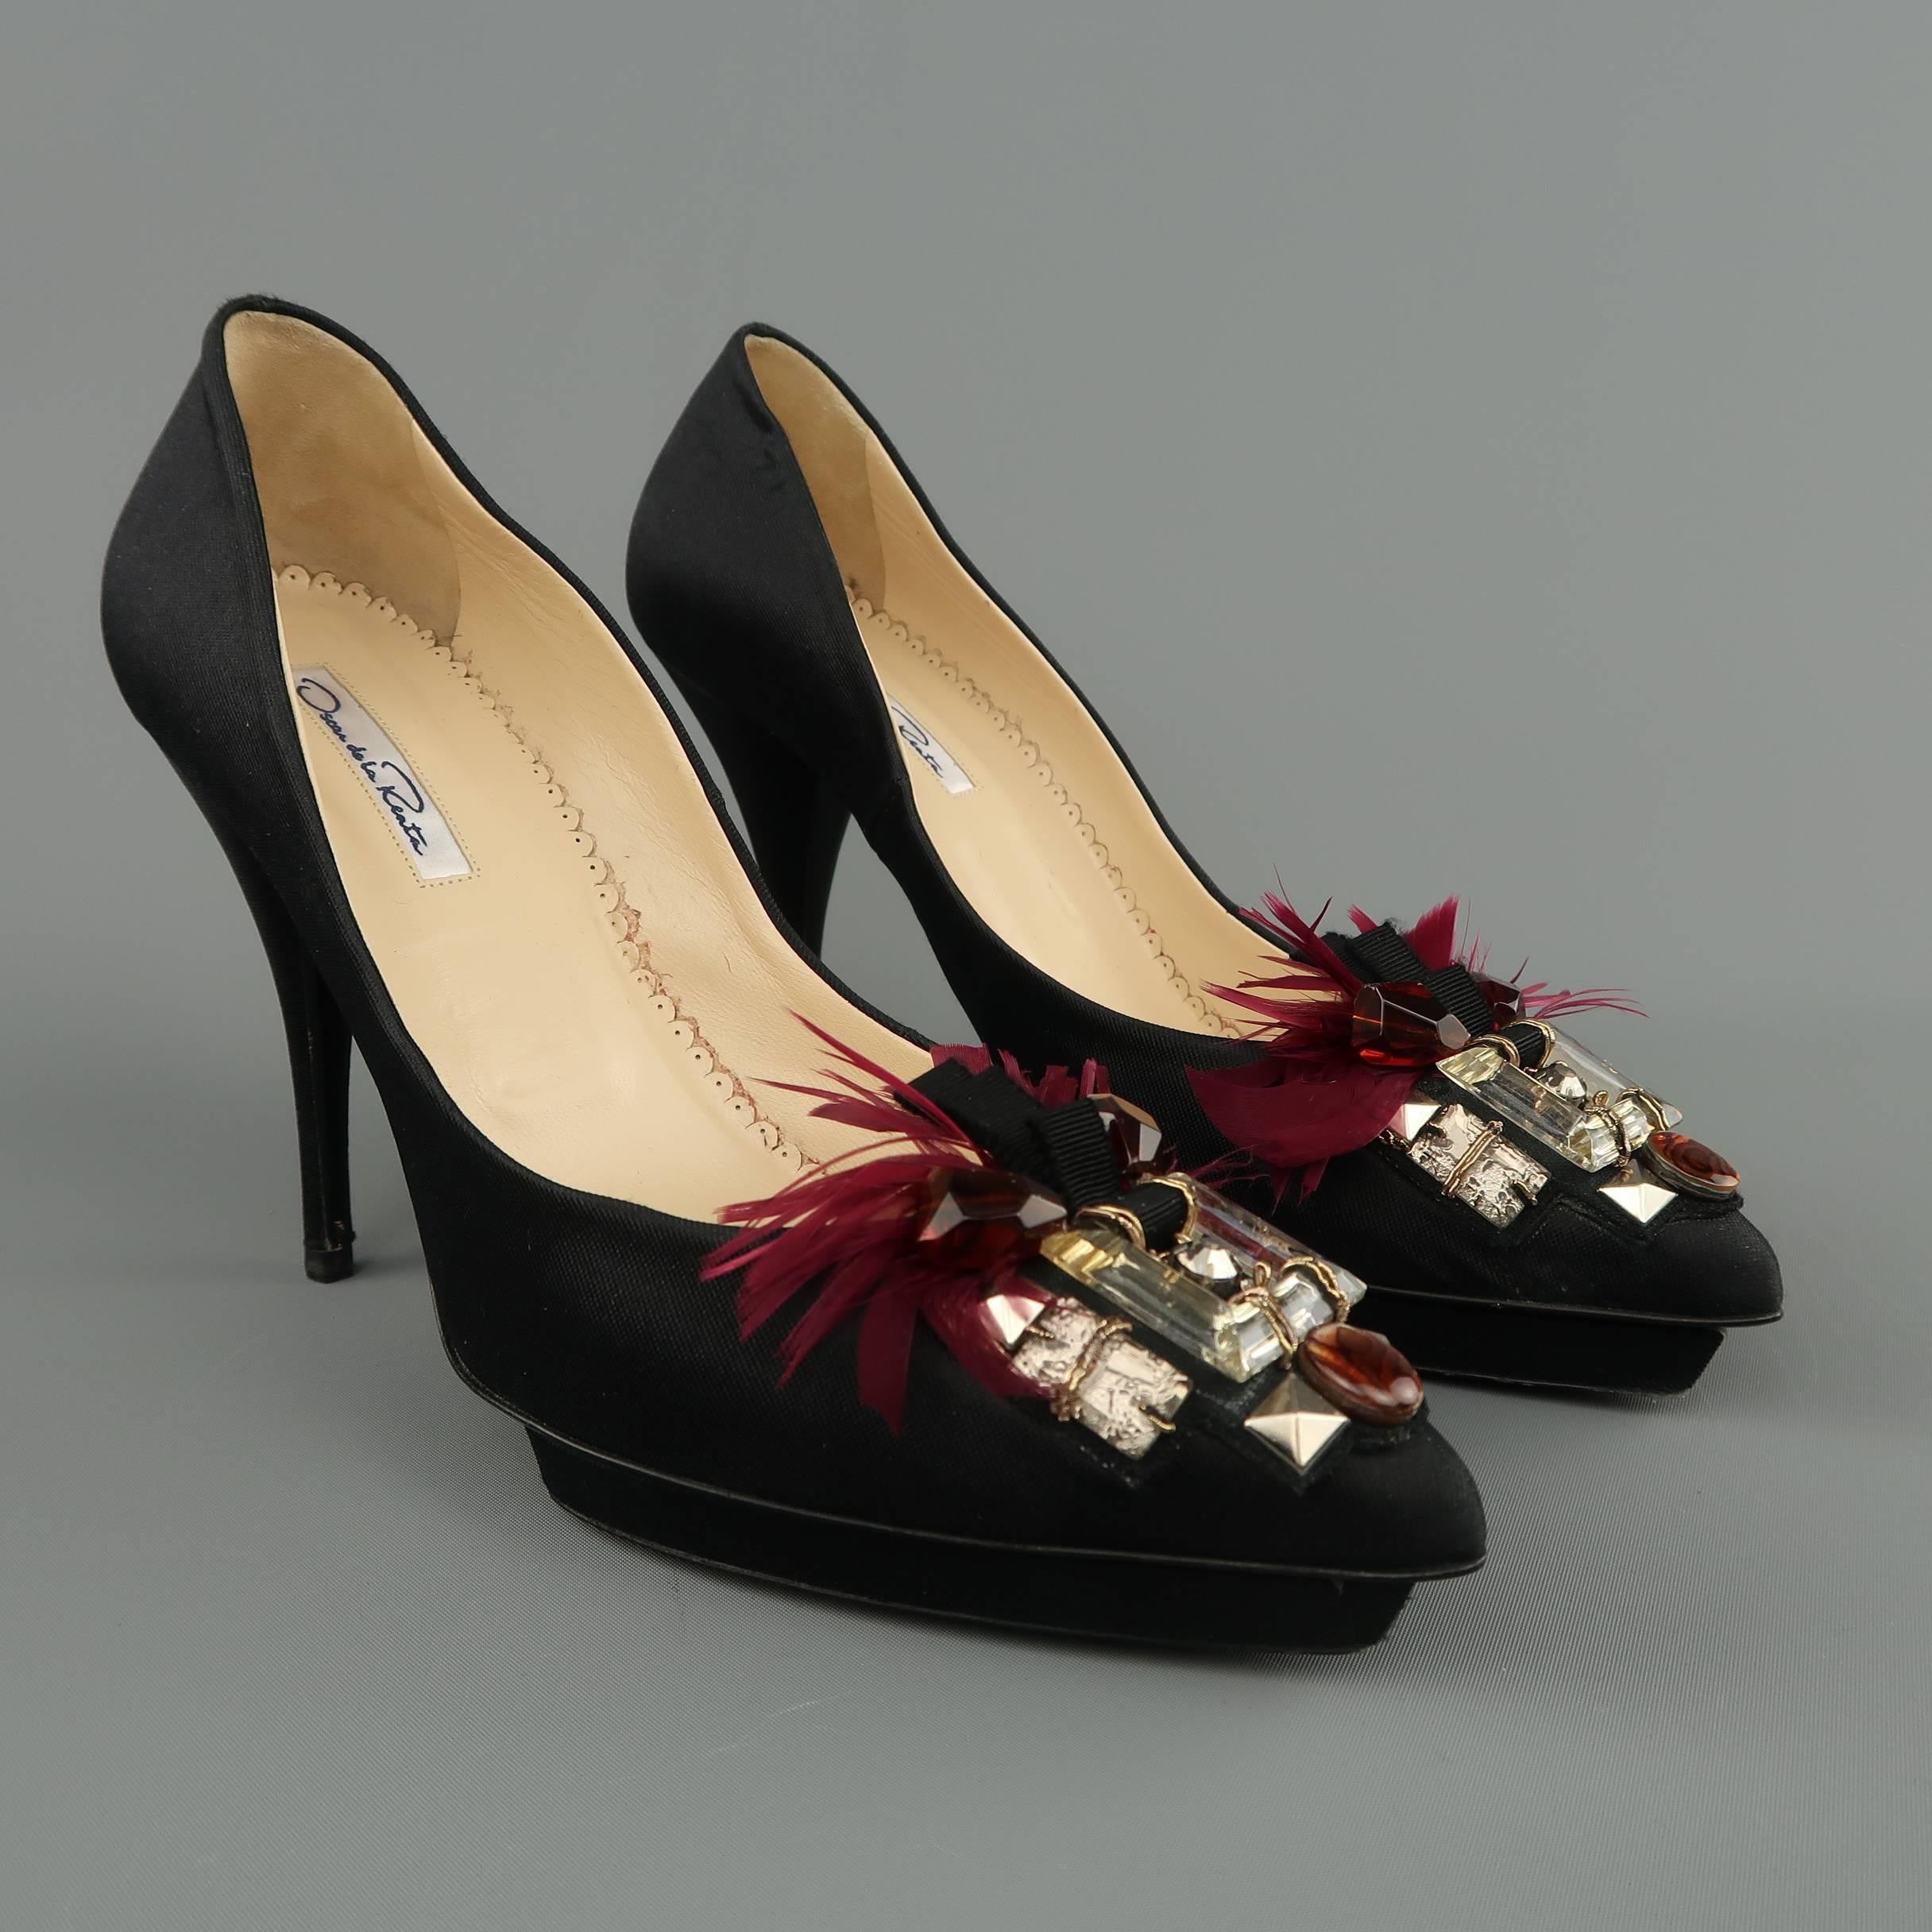 These gorgeous OSCAR DE LA RENTA pumps come in black silk twill with leather lining and feature a pointed toe with crystal, bead, stud, and feather adornment, covered stiletto heel, and platform. Made in Italy.
 
Excellent Pre-Owned